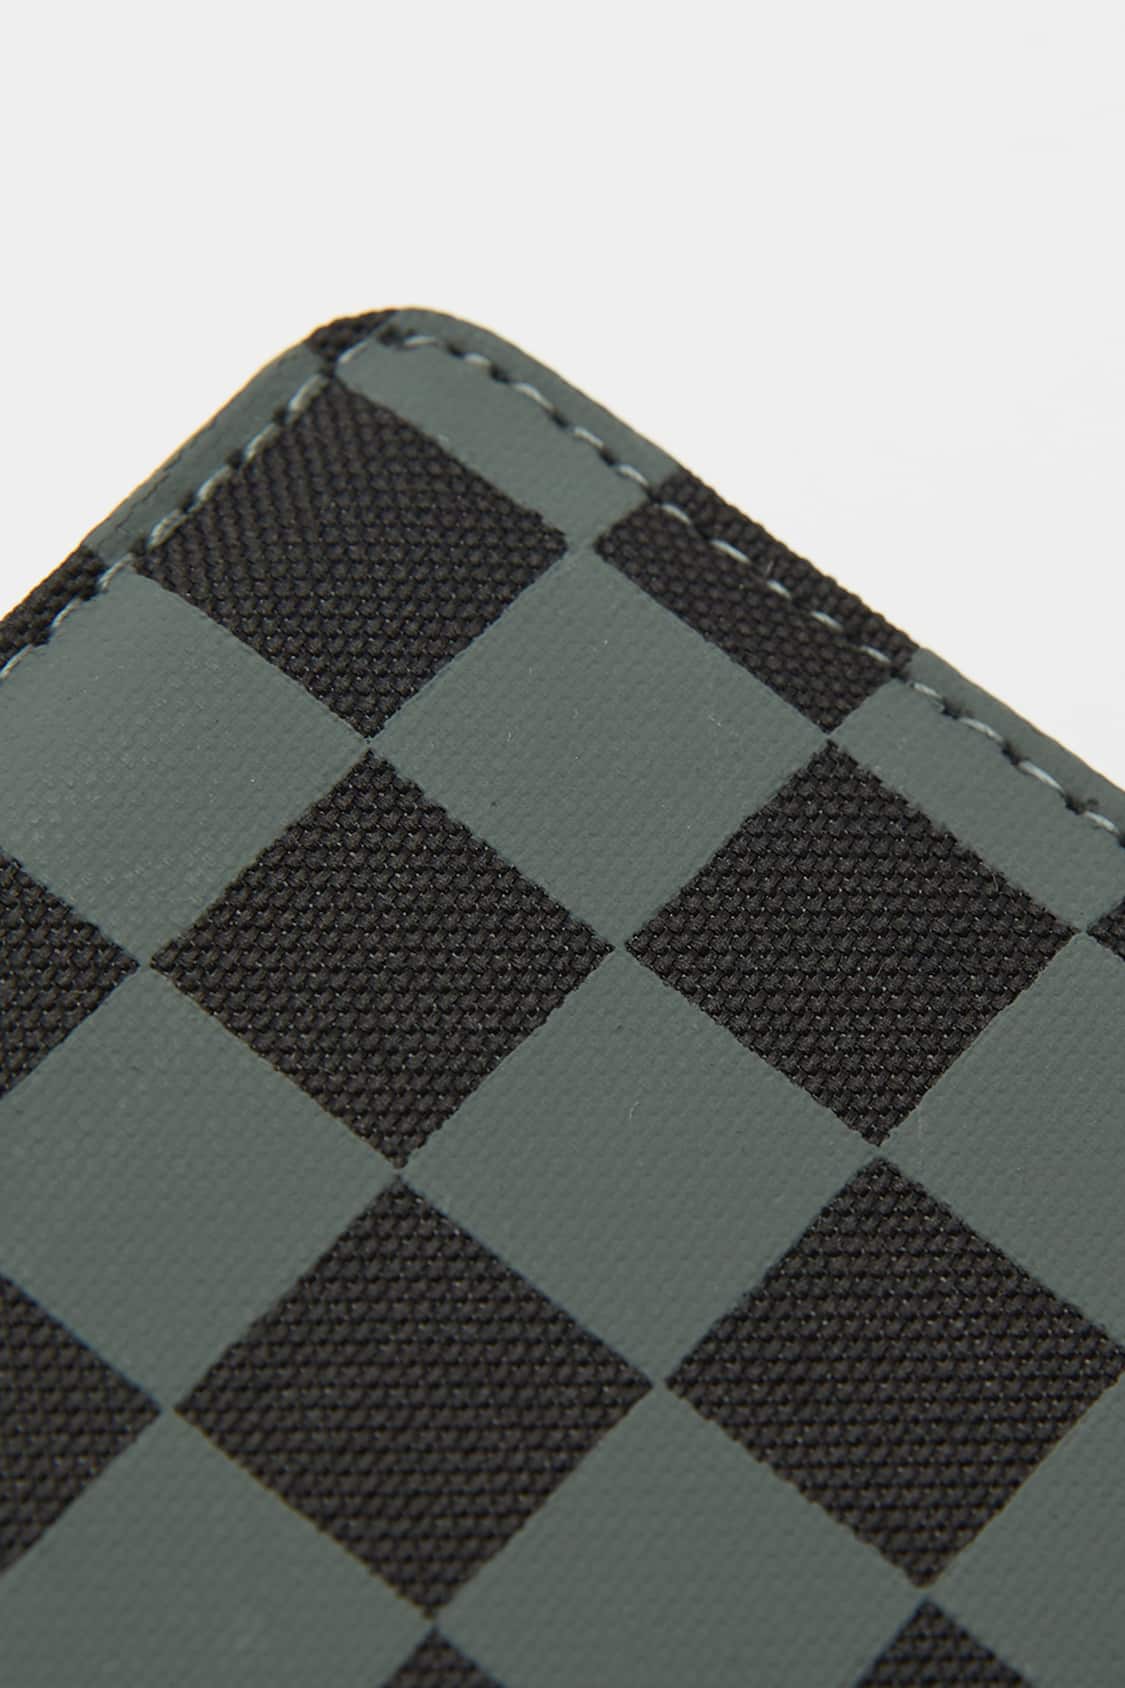 Pull&Bear Men's Multicolor Chequered Faux Leather Wallet